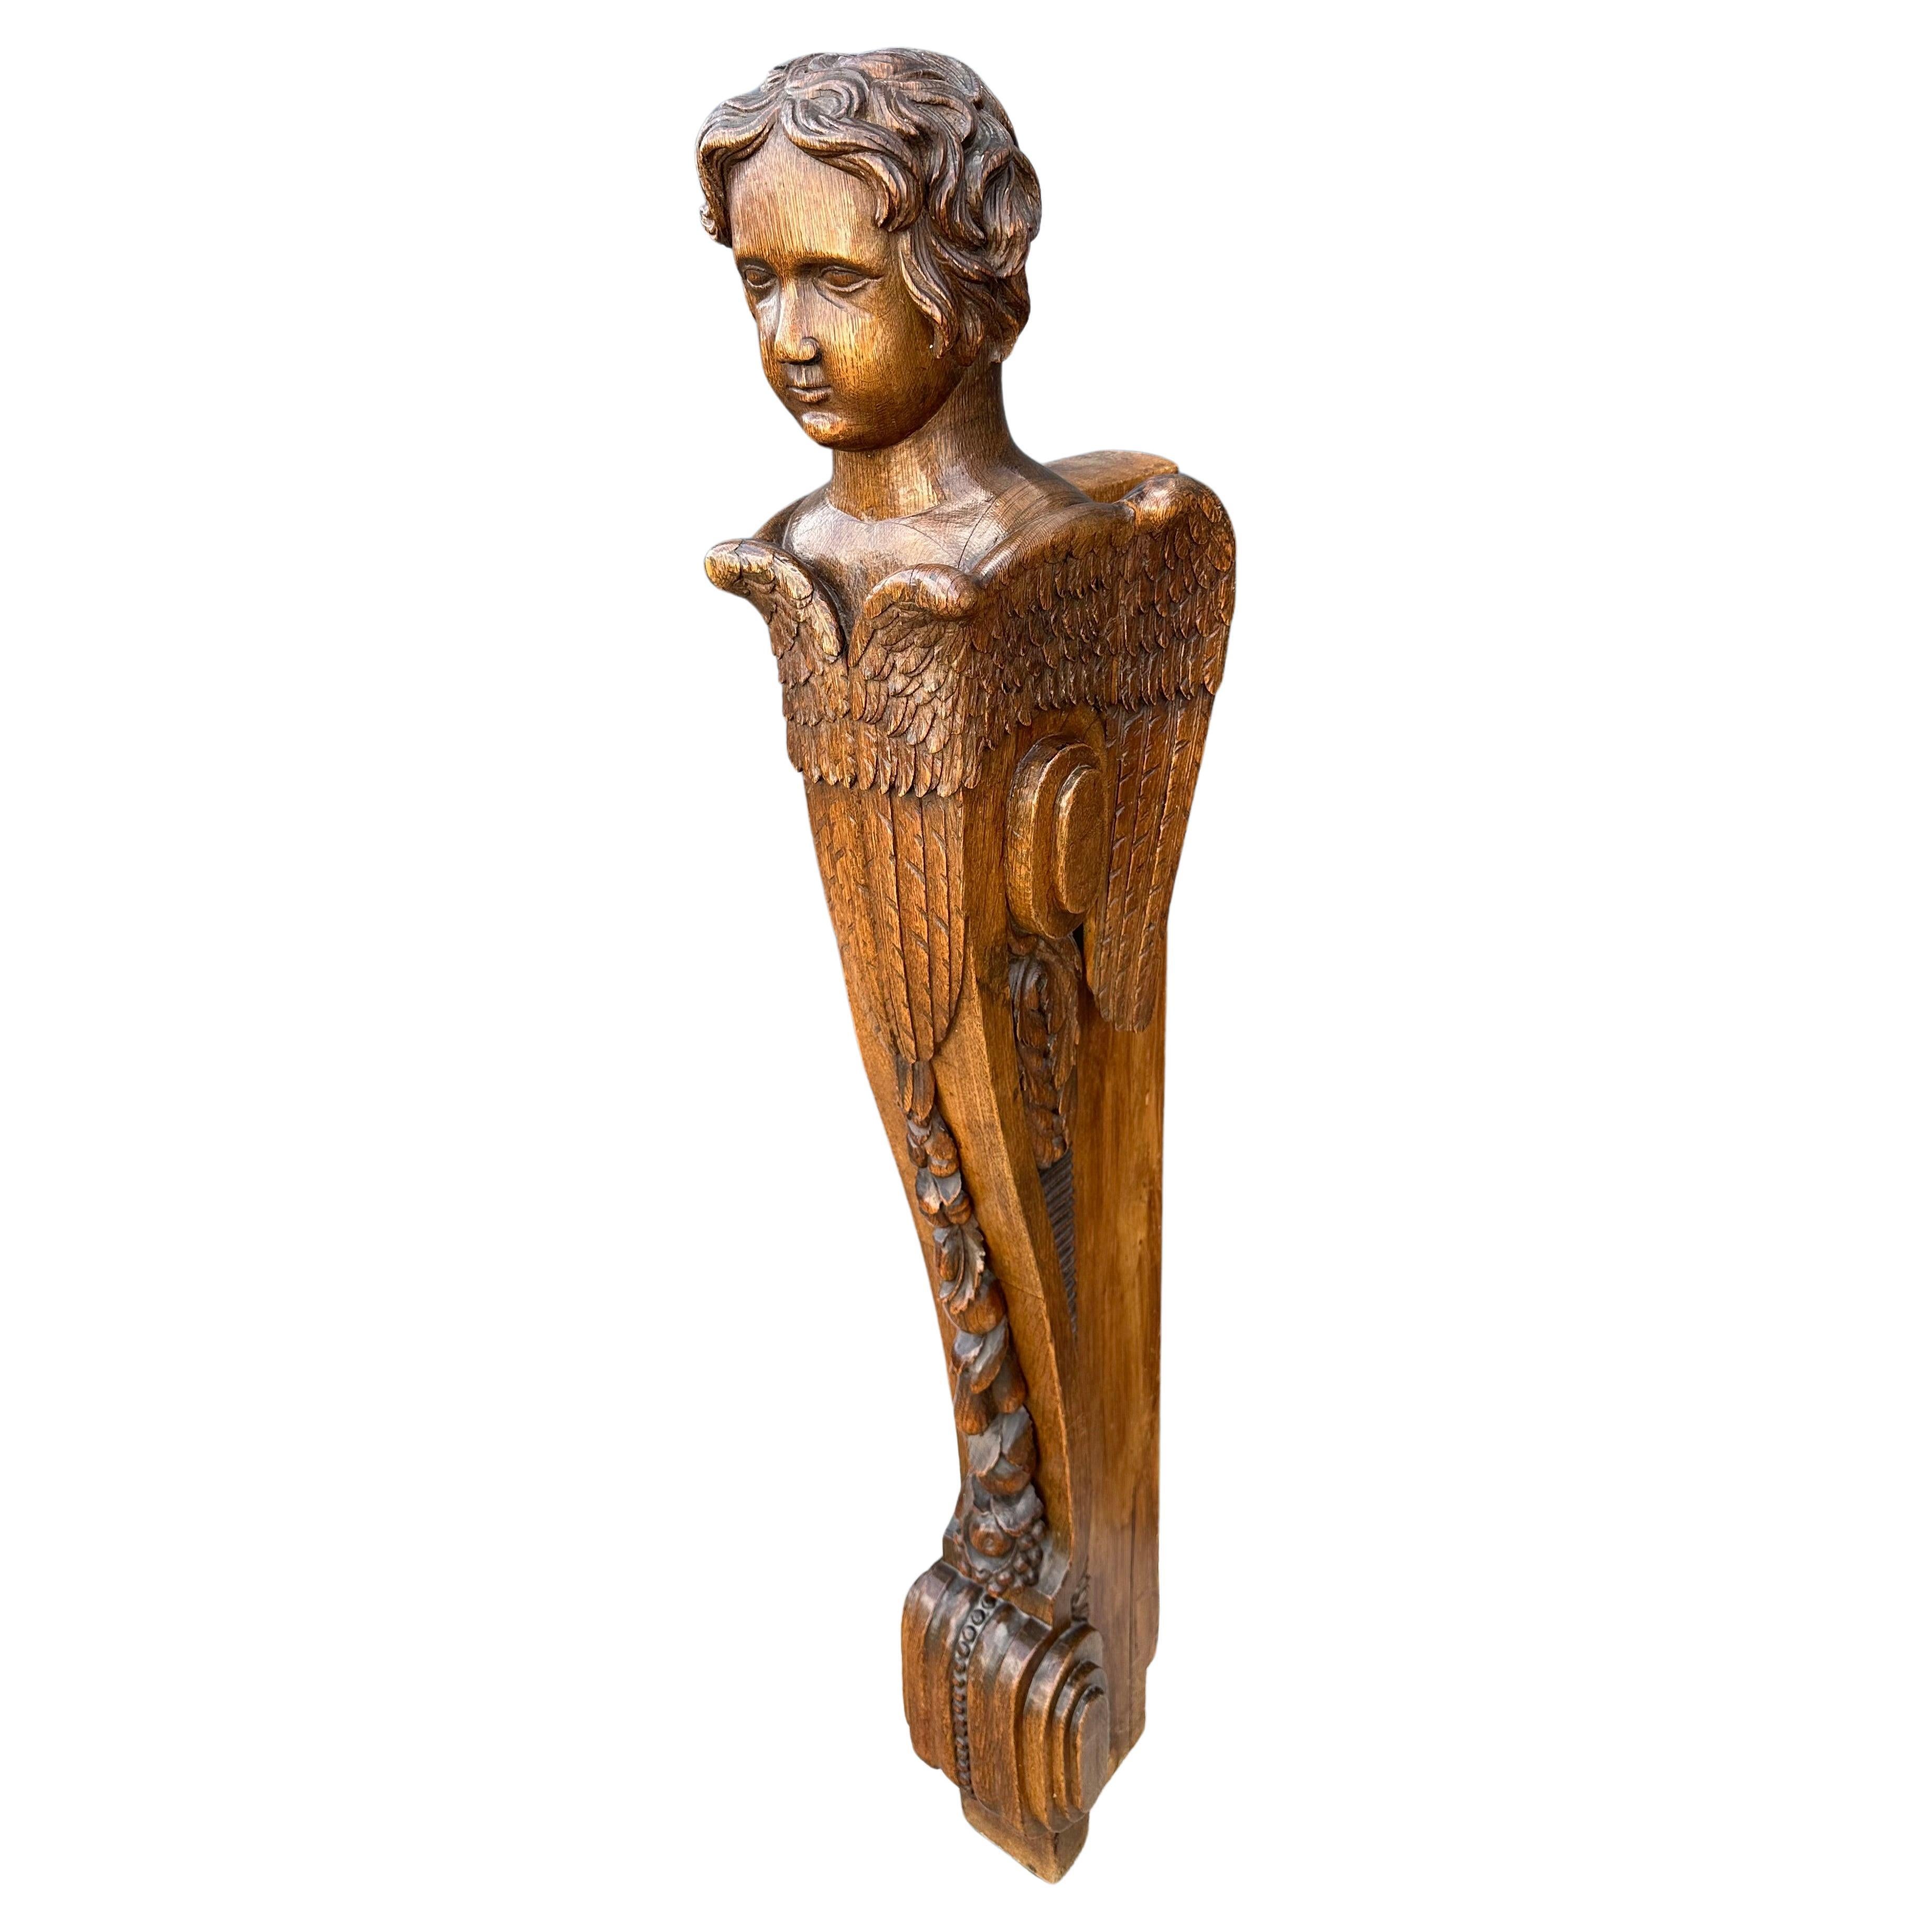 Antique Gothic Revival Carved Oak Stair Rail Newel Post w Angel Sculpture 19thC. For Sale